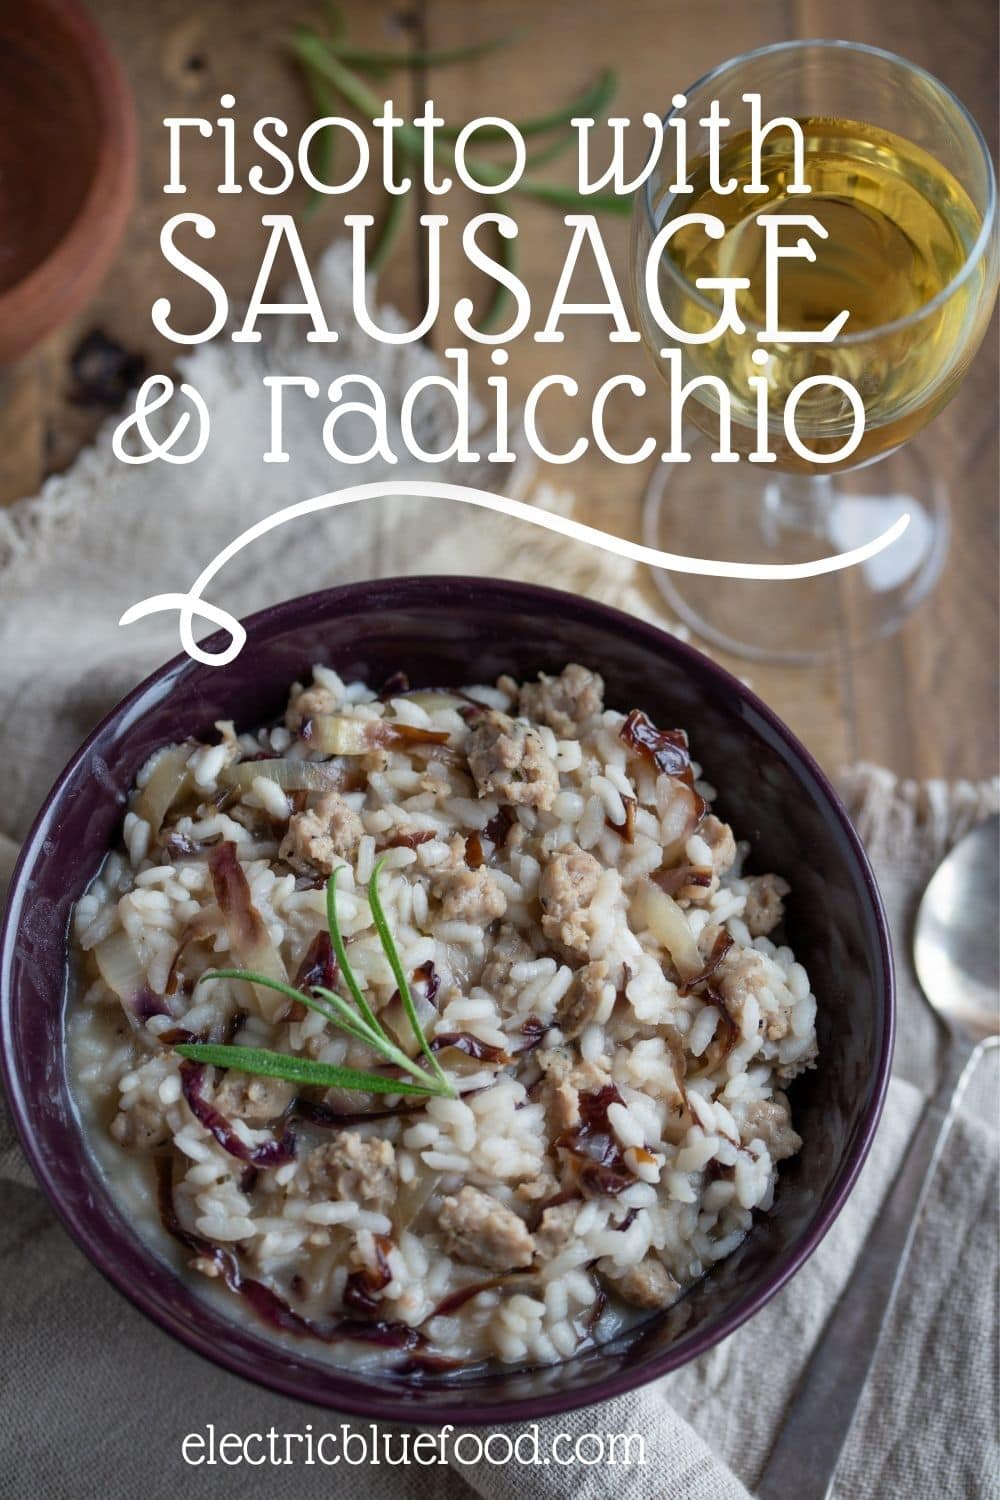 Risotto with sausage and radicchio, a lovely Italian recipe for a tasty risotto. The combination of flavours delivered by pork sausage and bitter radicchio is outstanding. Make sausage risotto with radicchio following the easy step by step instructions in this recipe.